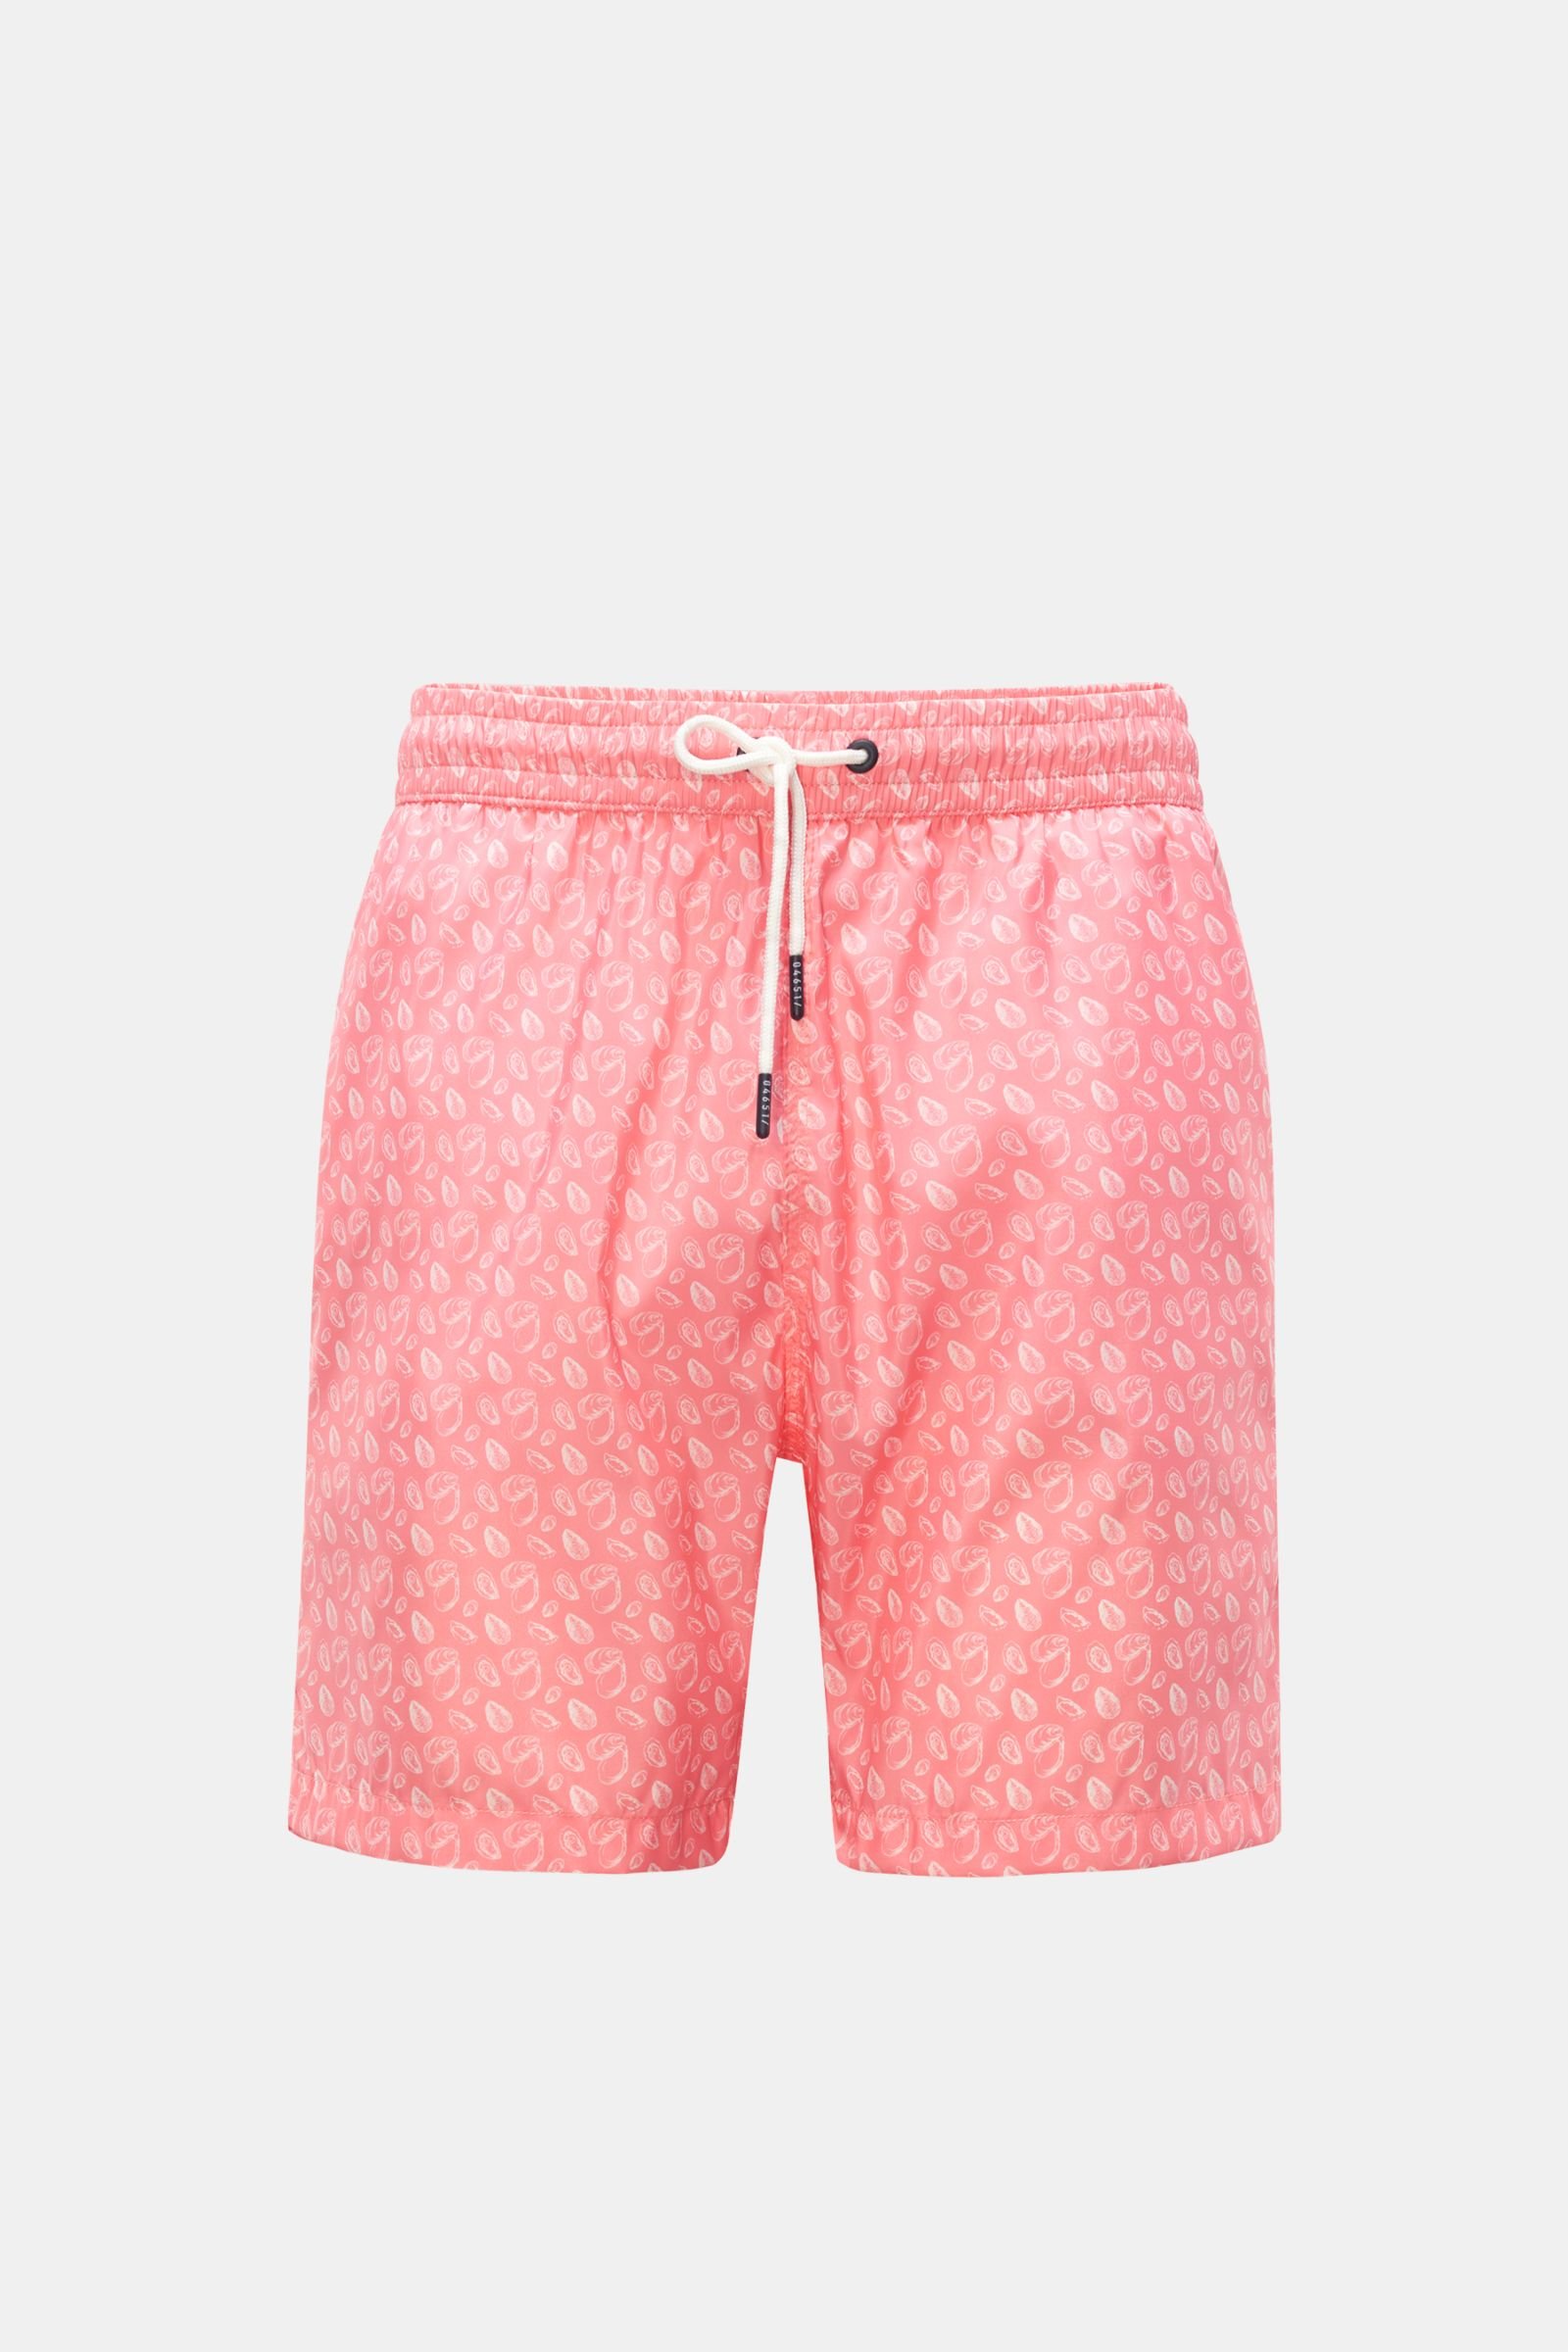 Swim shorts coral patterned